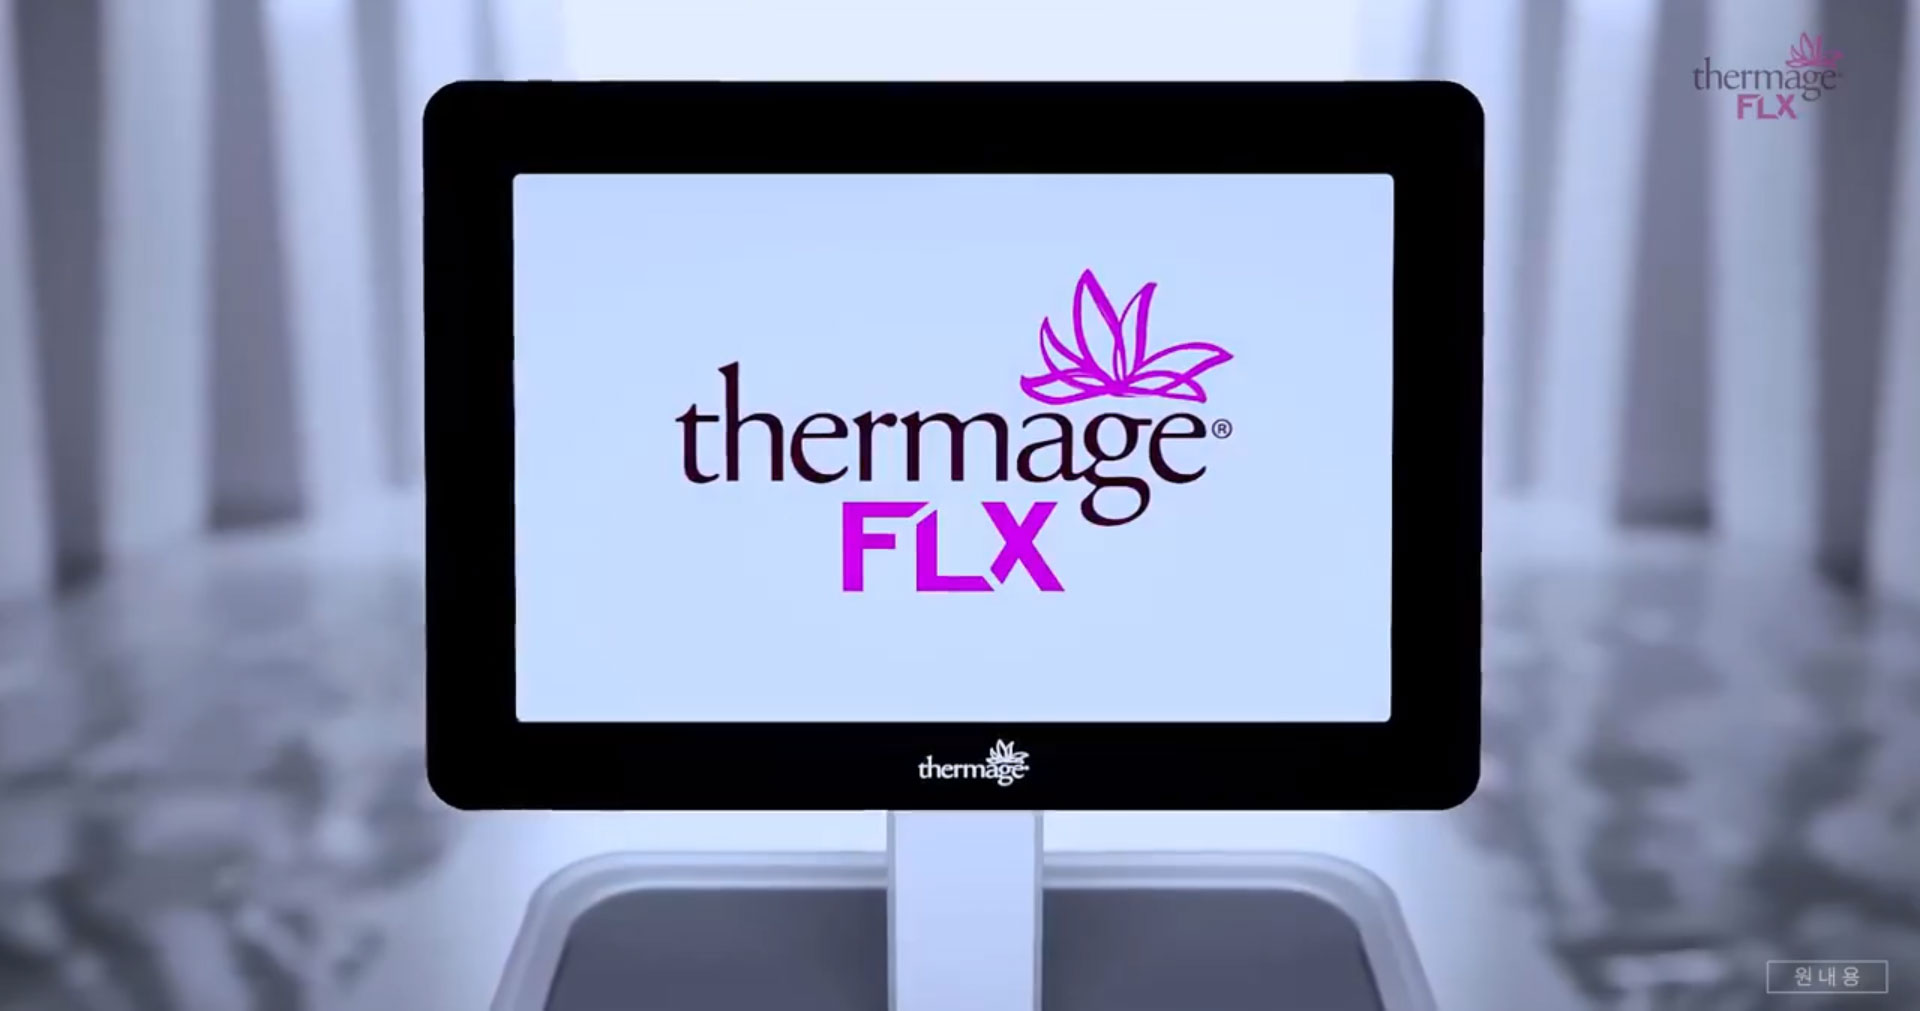 thermage flex video